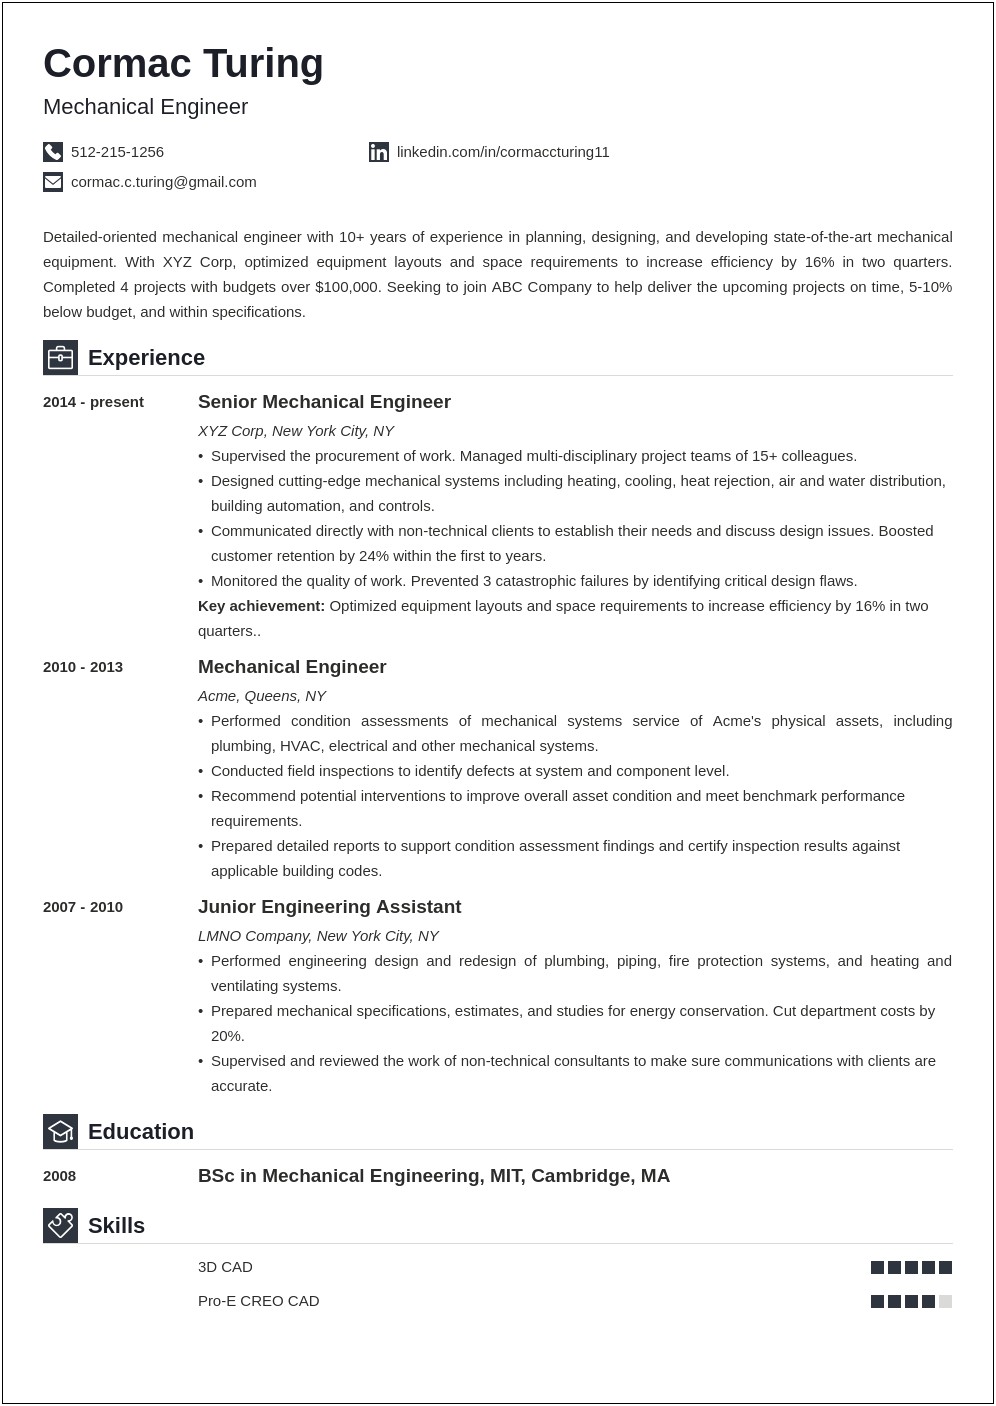 Petrolueum Engineering Student Resume With No Experience